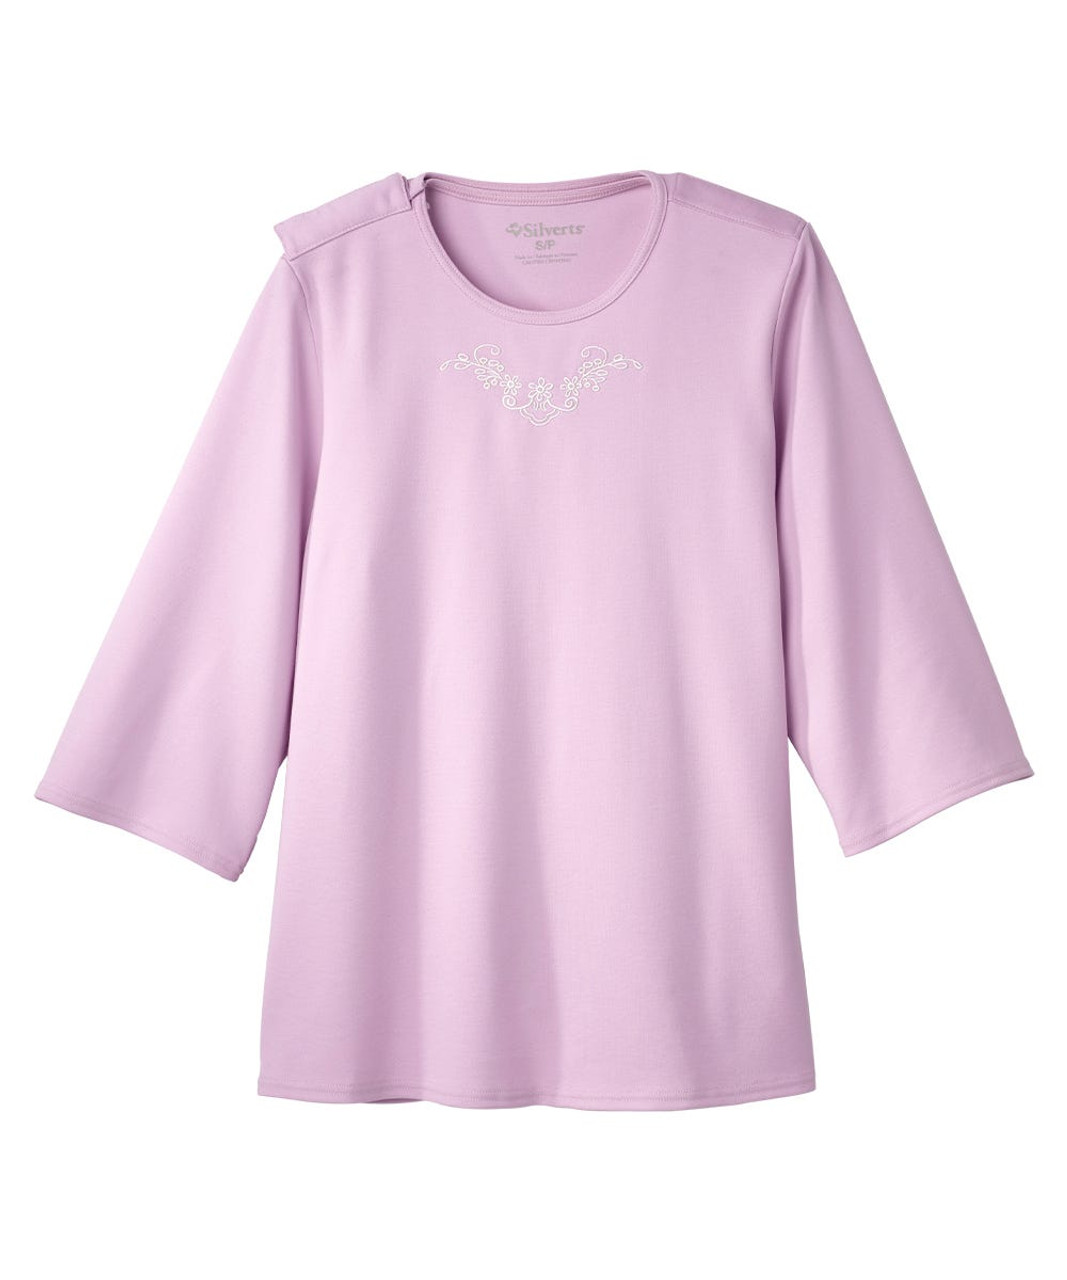 Silverts SV24700 Warm Winter Weight Adaptive Clothing Top for Women Lilac Mist, Size=S, SV24700-LIMI-S